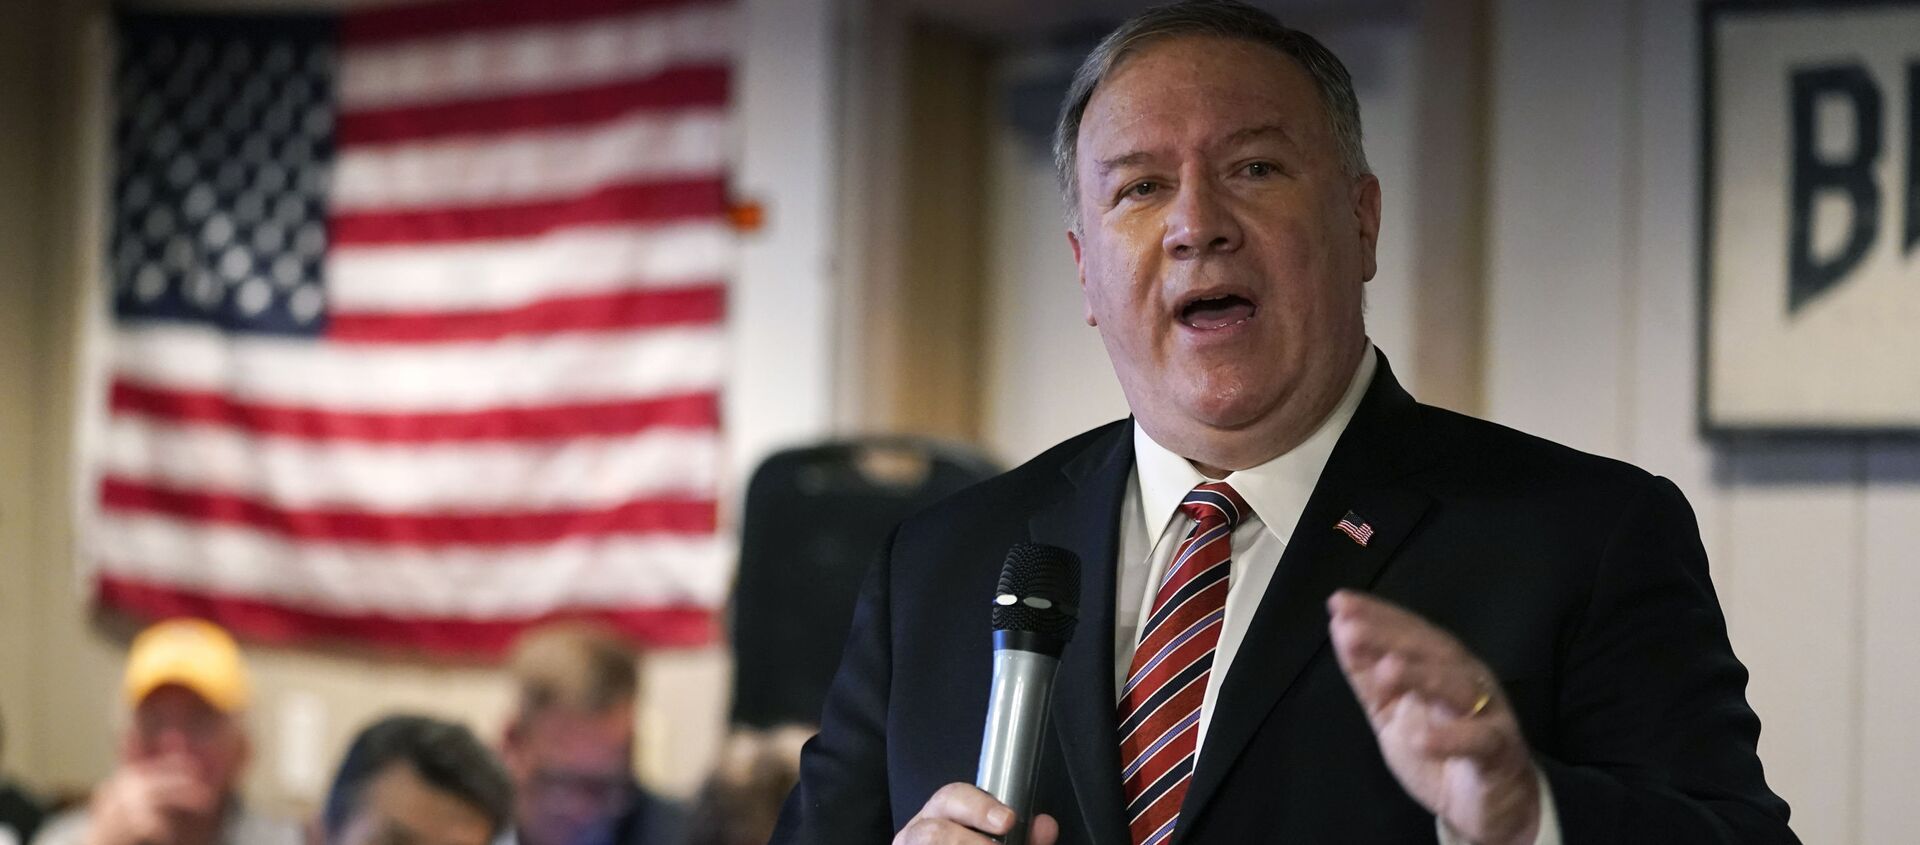 In this March 26, 2021, file photo former Secretary of State Mike Pompeo speaks at the West Side Conservative Club in Urbandale, Iowa. - Sputnik International, 1920, 29.05.2021